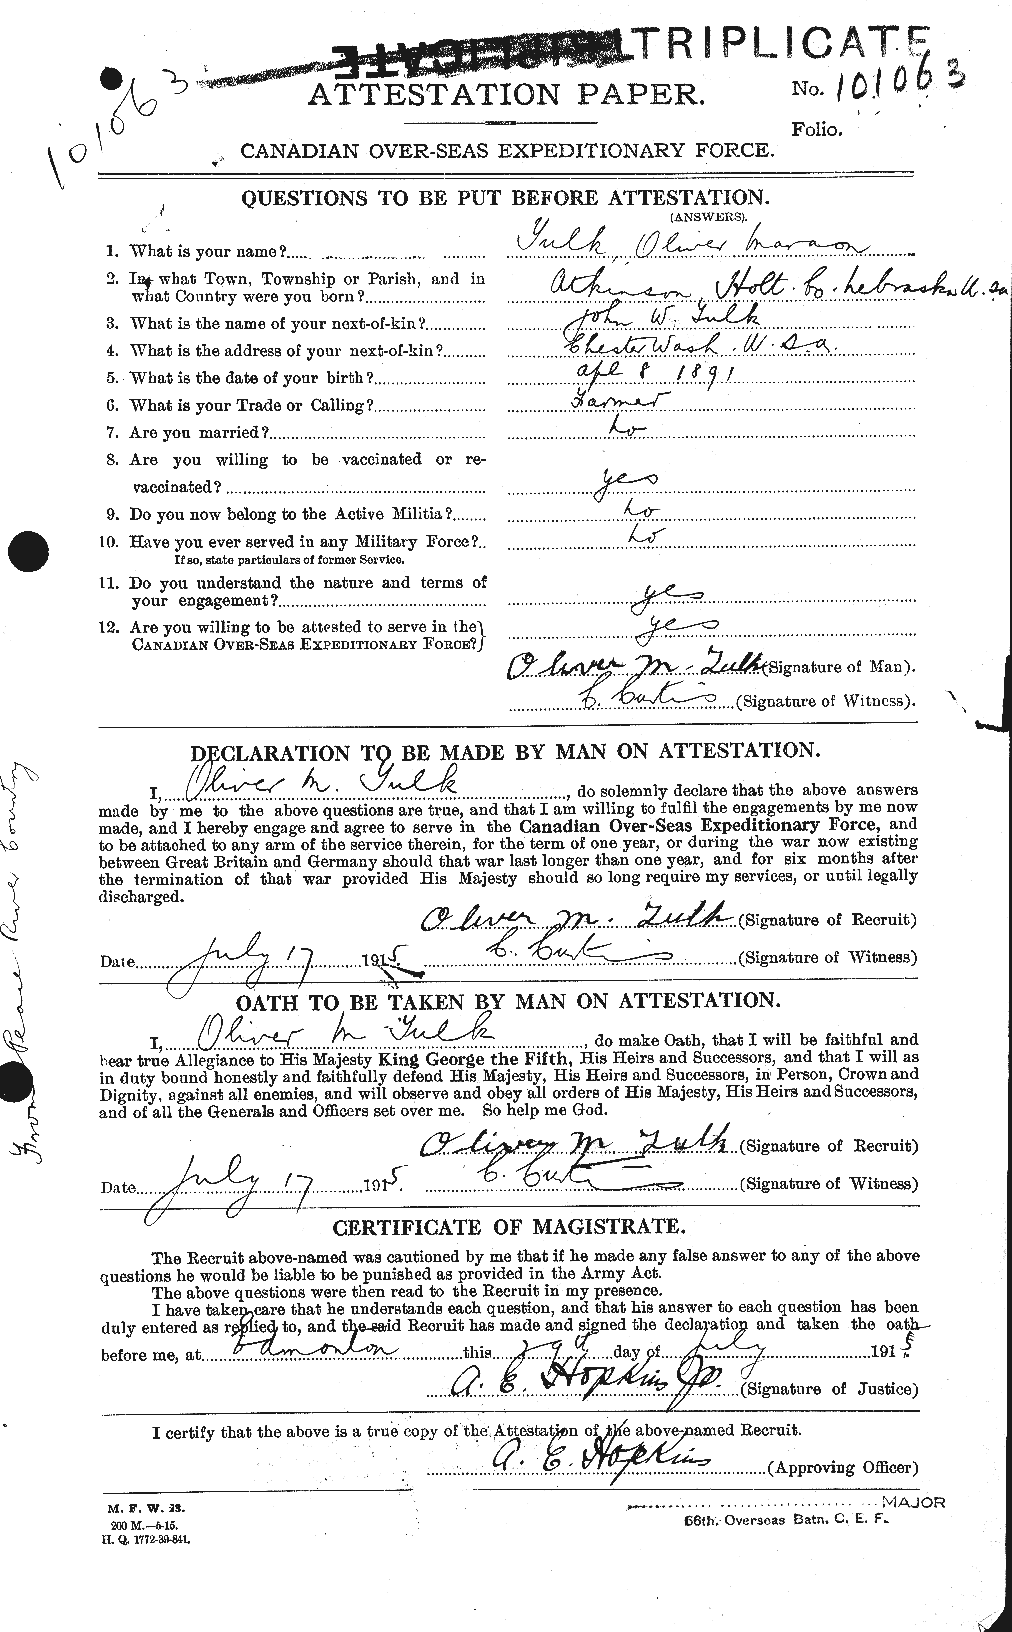 Personnel Records of the First World War - CEF 644298a